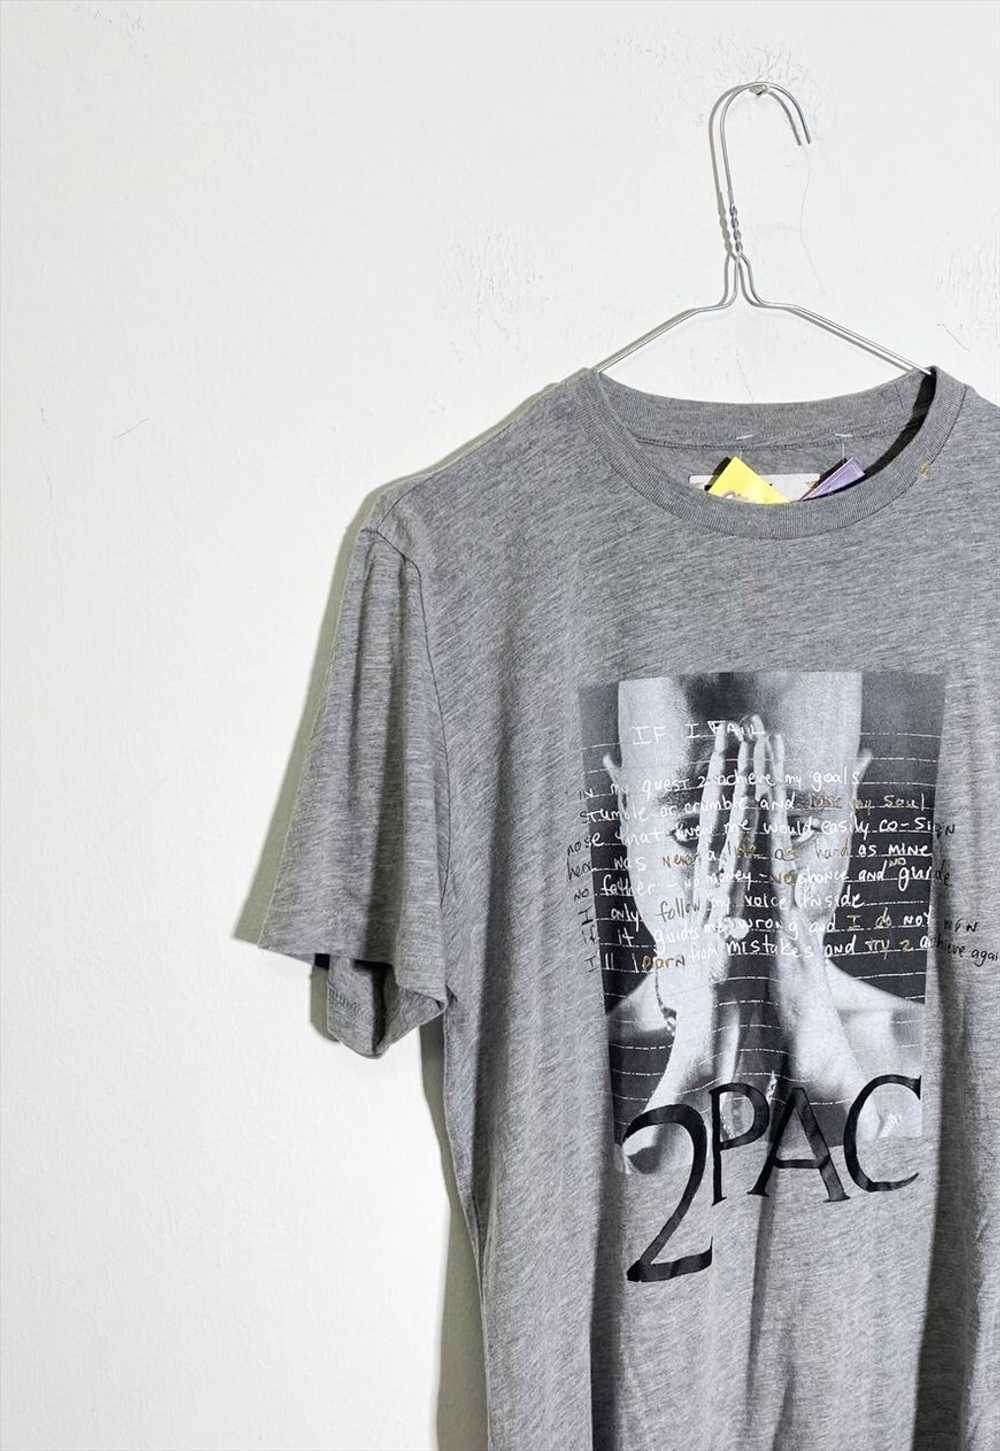 Preloved "Pac tribute limited edition t-shirt - image 5